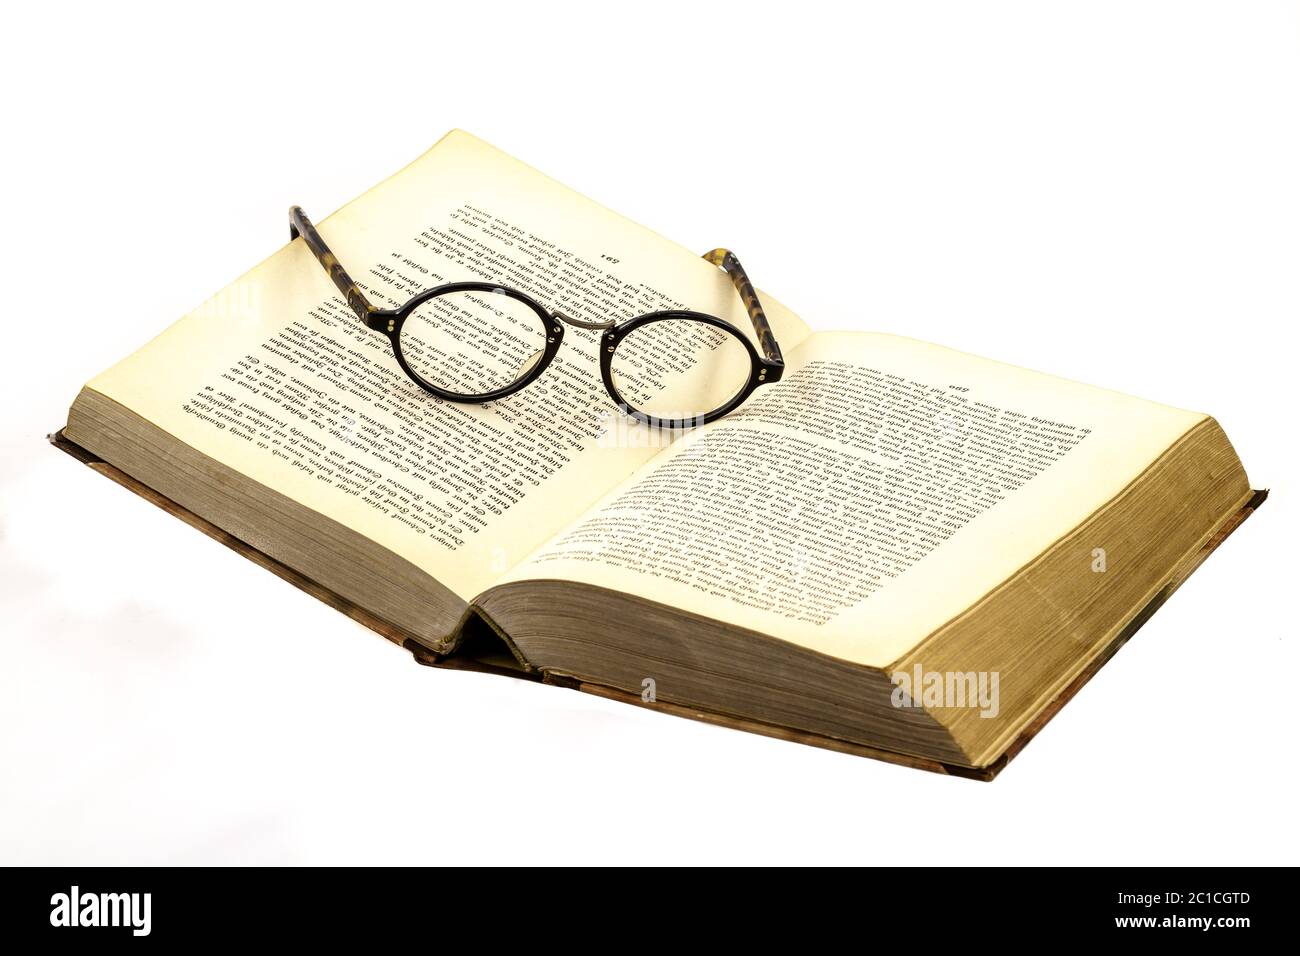 The glasses in the book with Old German script Stock Photo